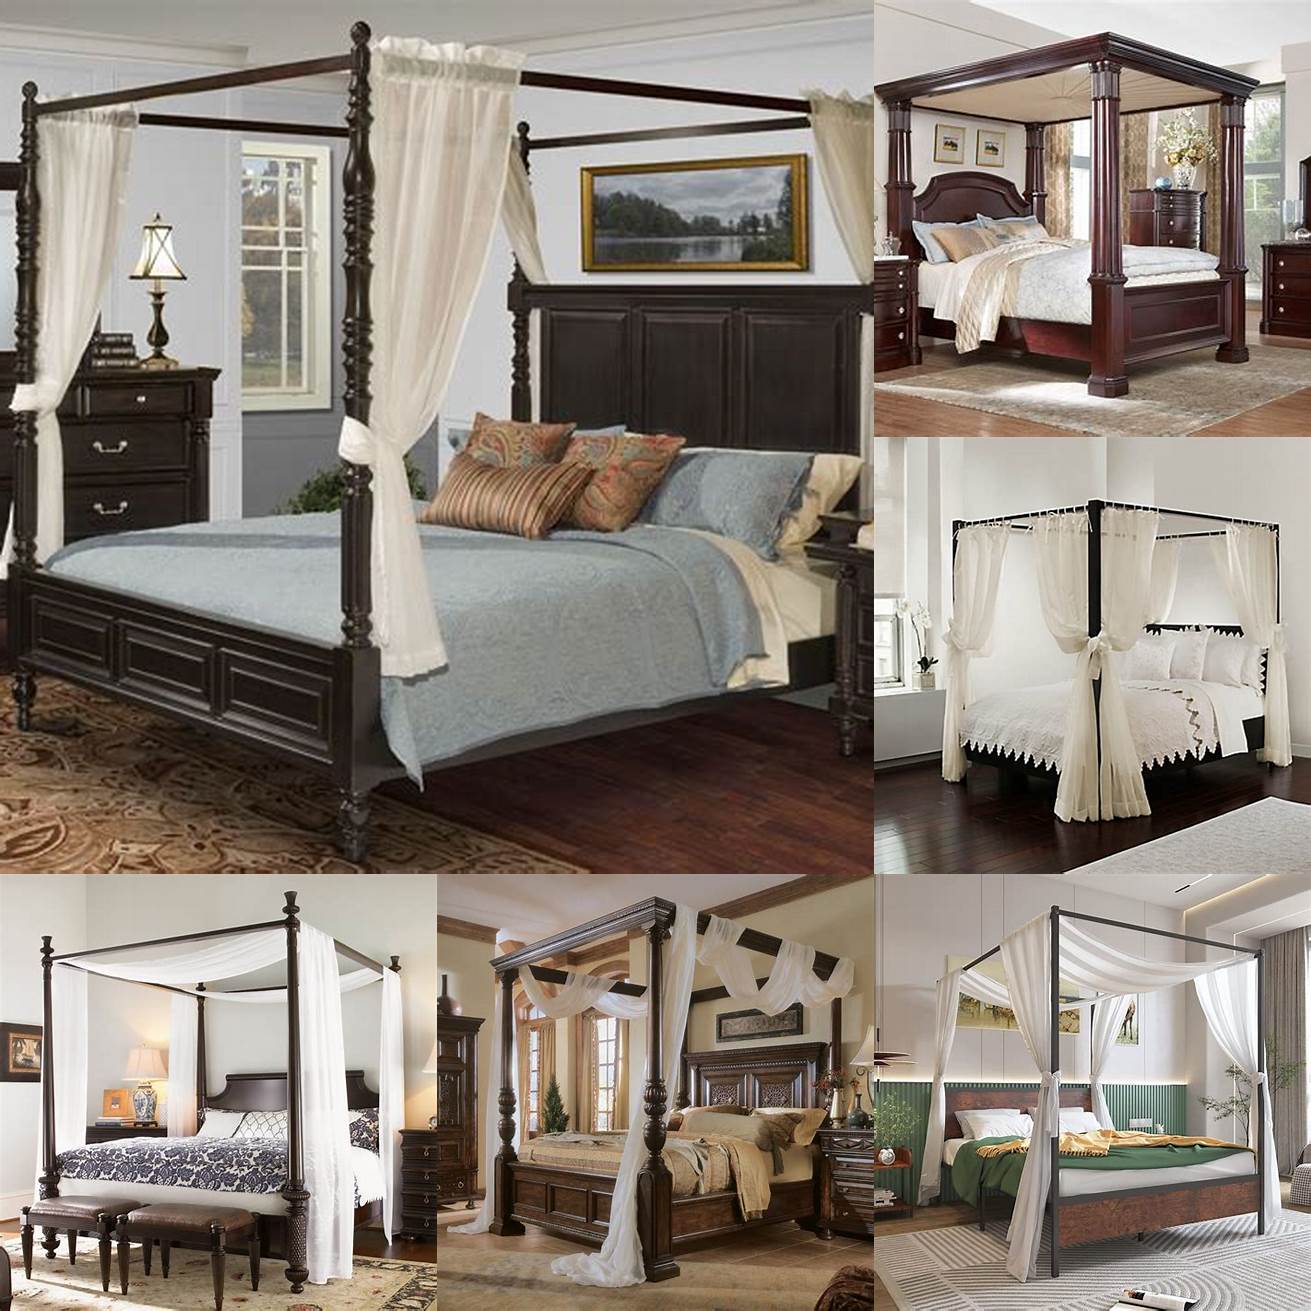 Canopy beds